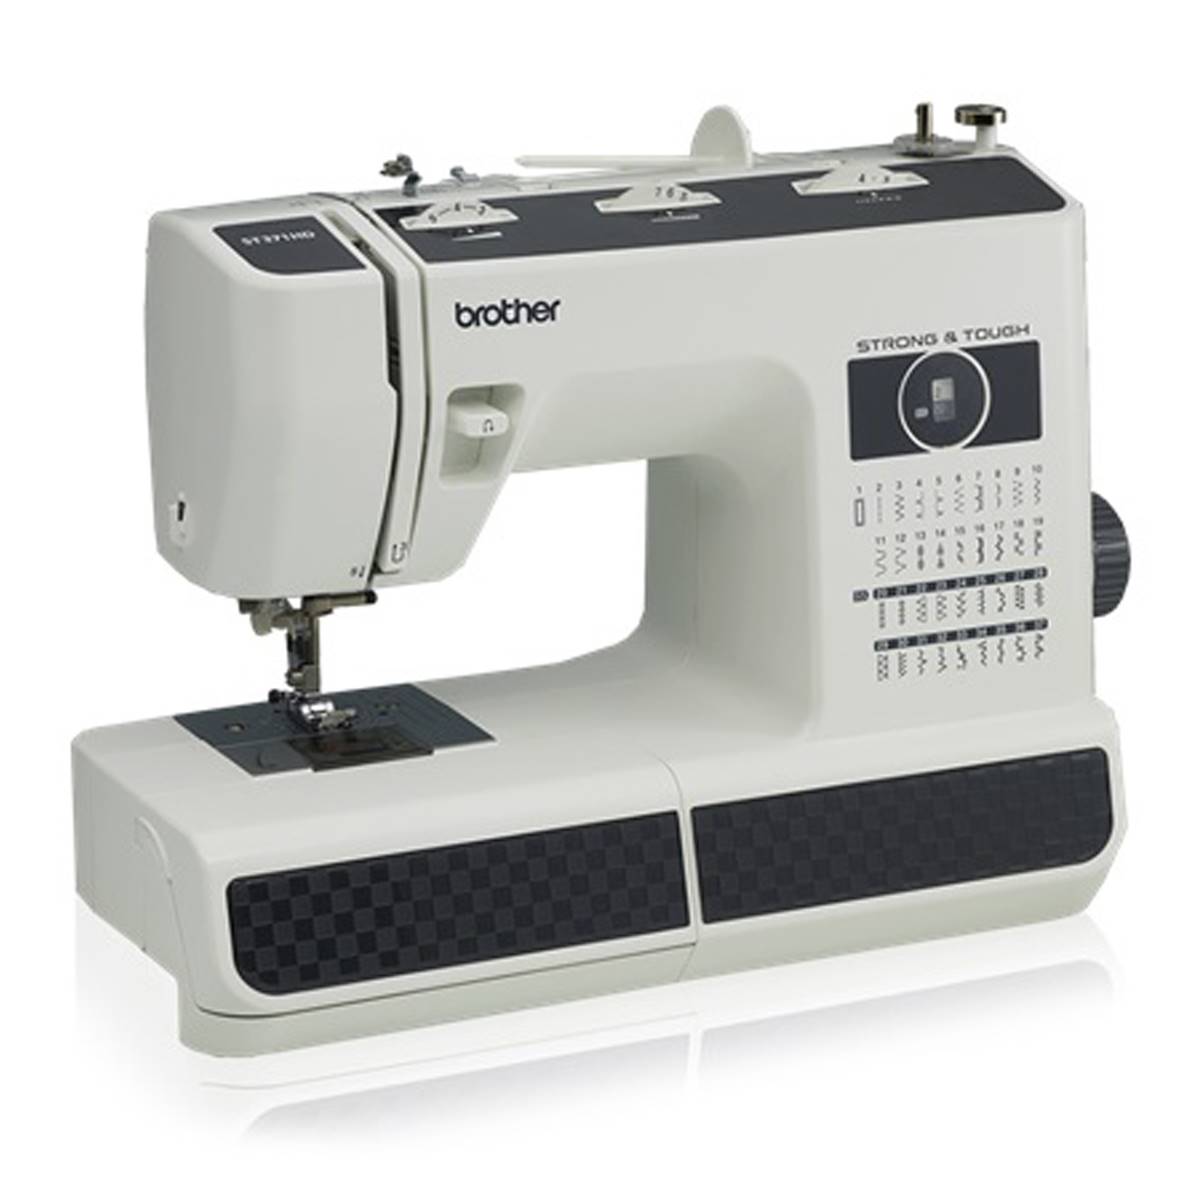 Brother ST371HD Strong And Tough Sewing Machine